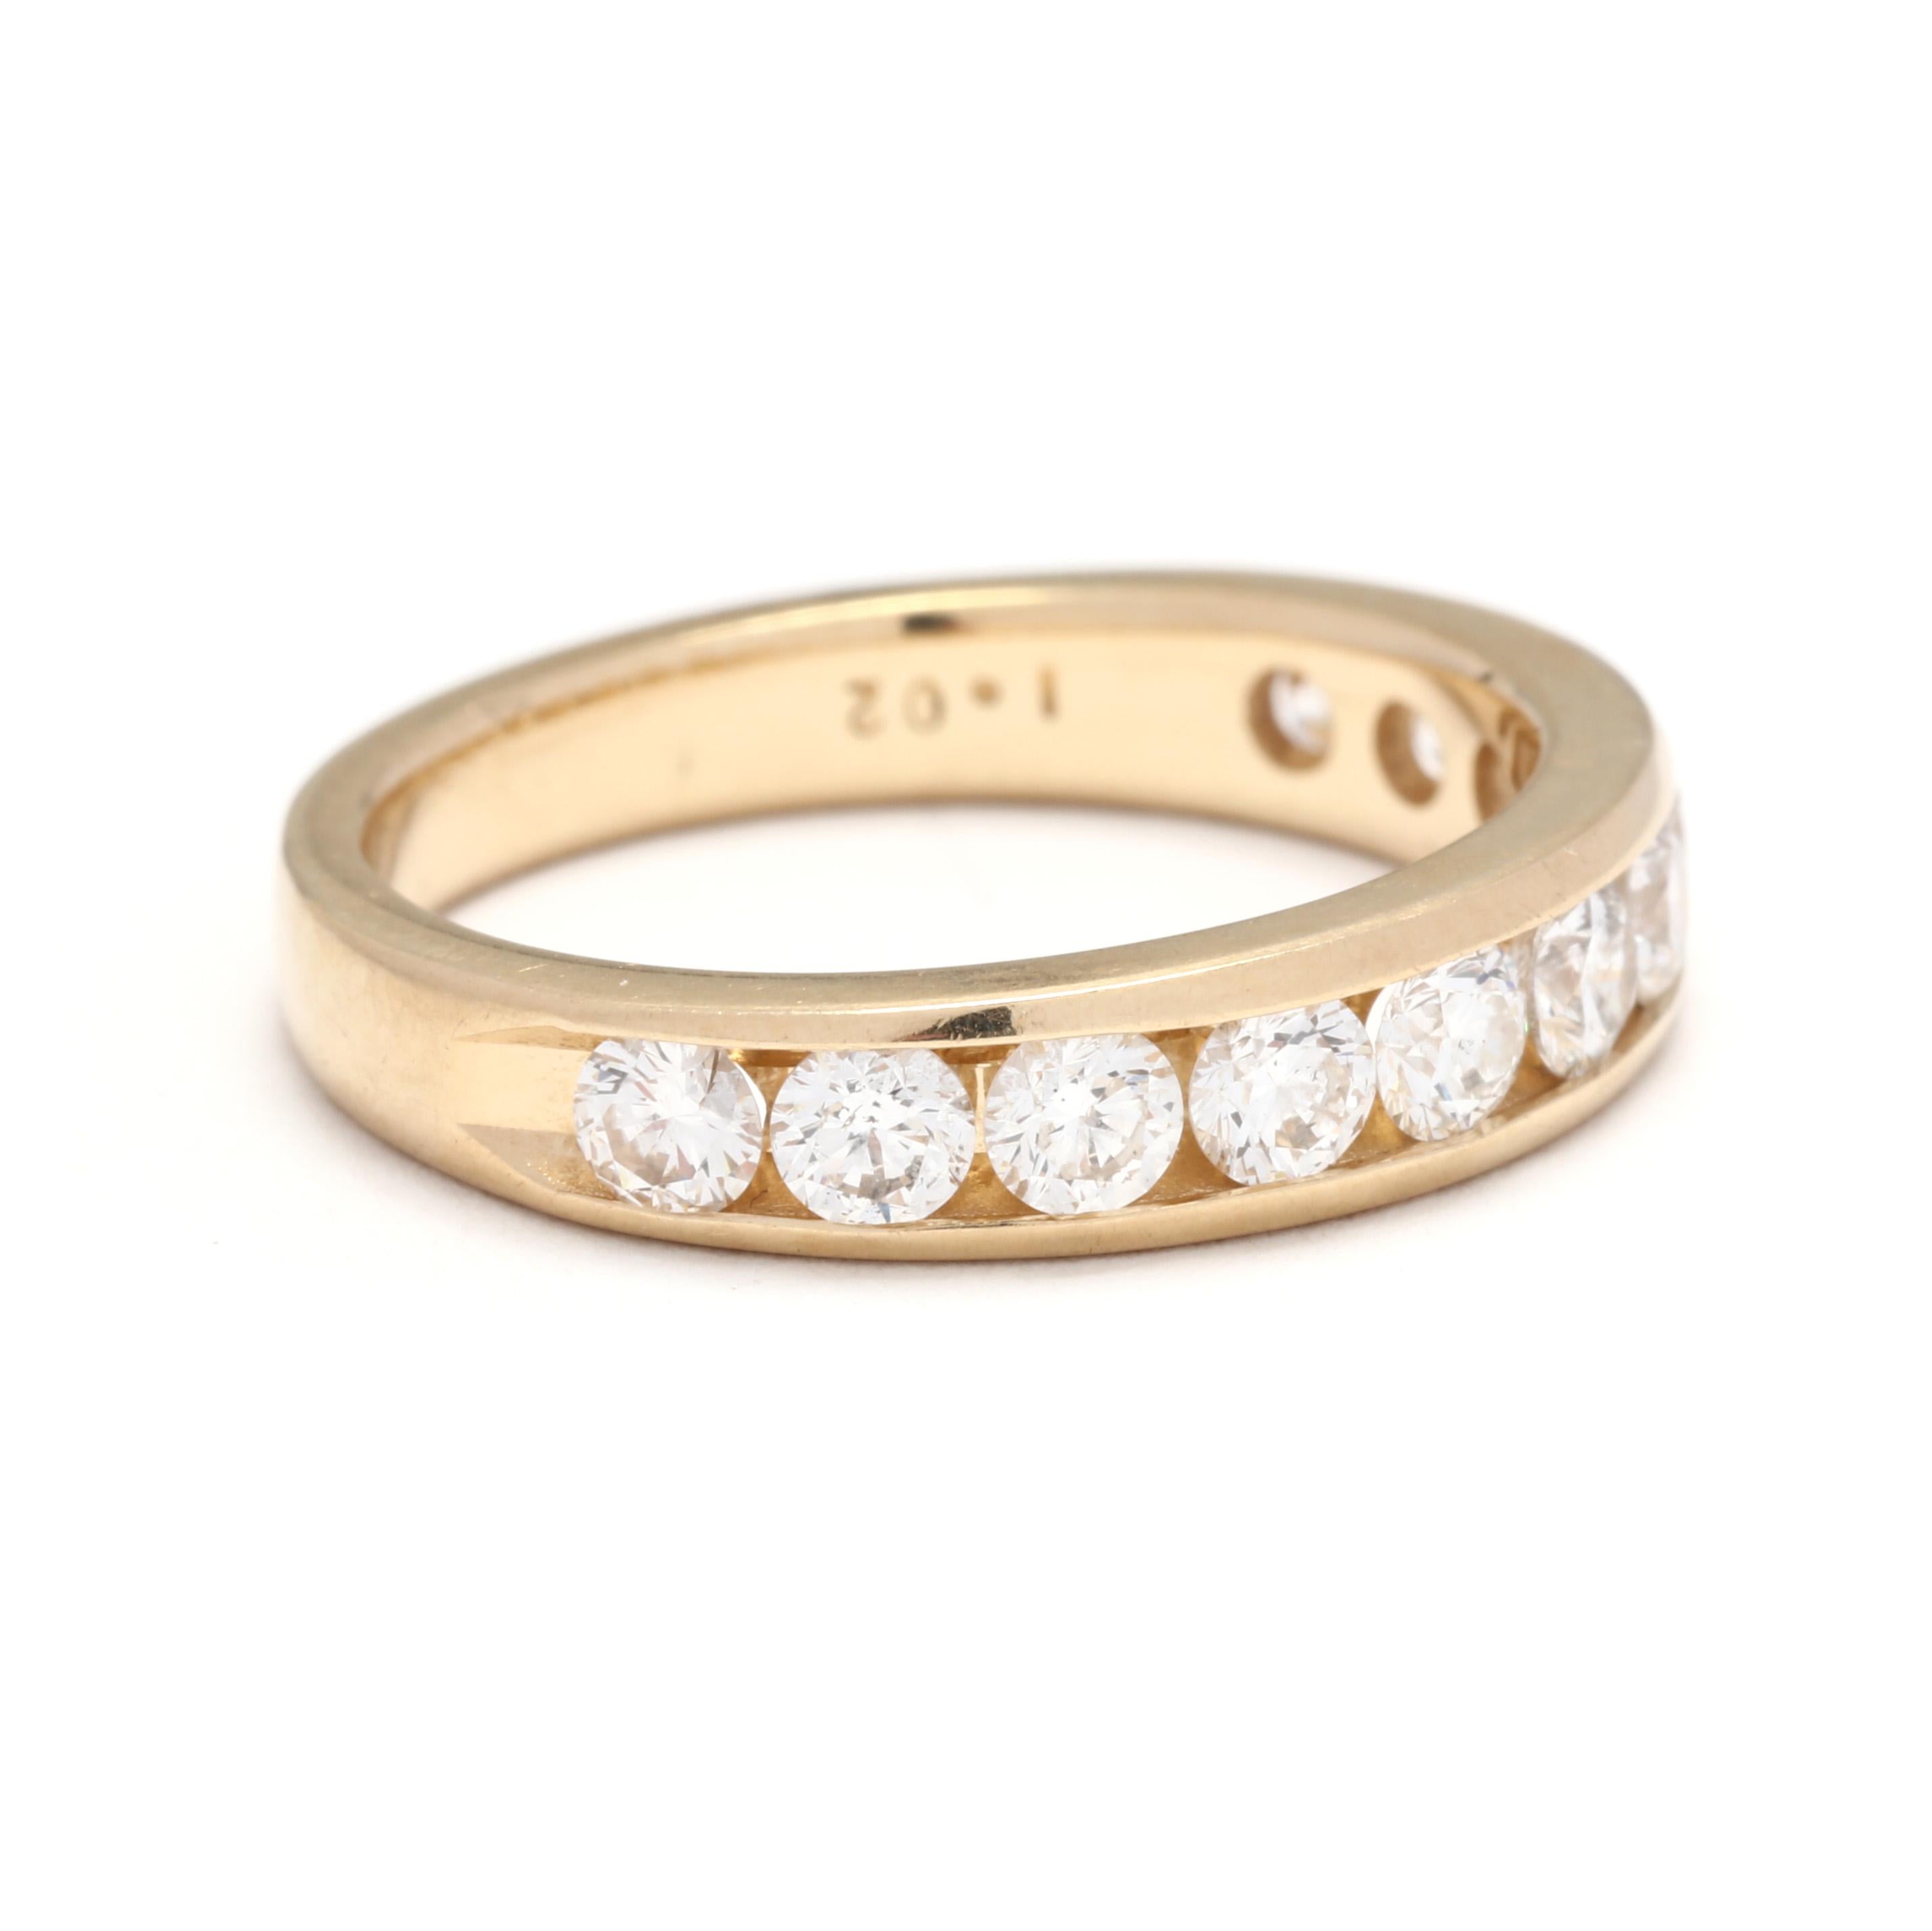 A 14 karat yellow gold channel set diamond wedding band. This wide wedding band features eleven channel set, round brilliant cut diamonds weighing approximately 1.02 total carats and with a straight band.

Stones:
- diamonds, 11 stones
- round